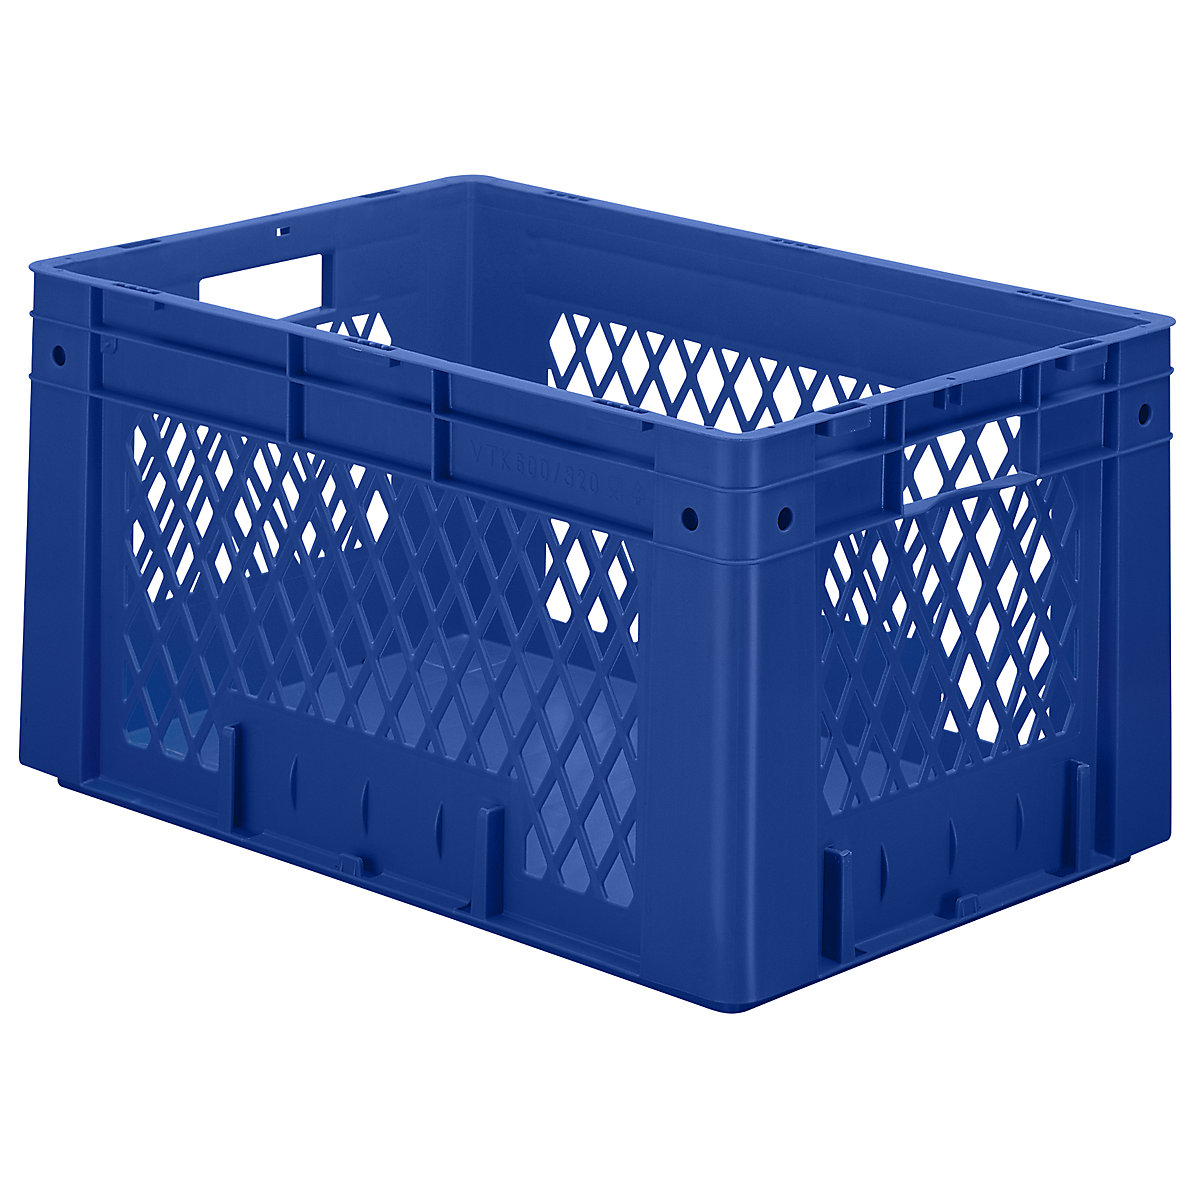 Heavy duty Euro container, polypropylene, capacity 60 l, LxWxH 600 x 400 x 320 mm, perforated walls, solid base, blue, pack of 2